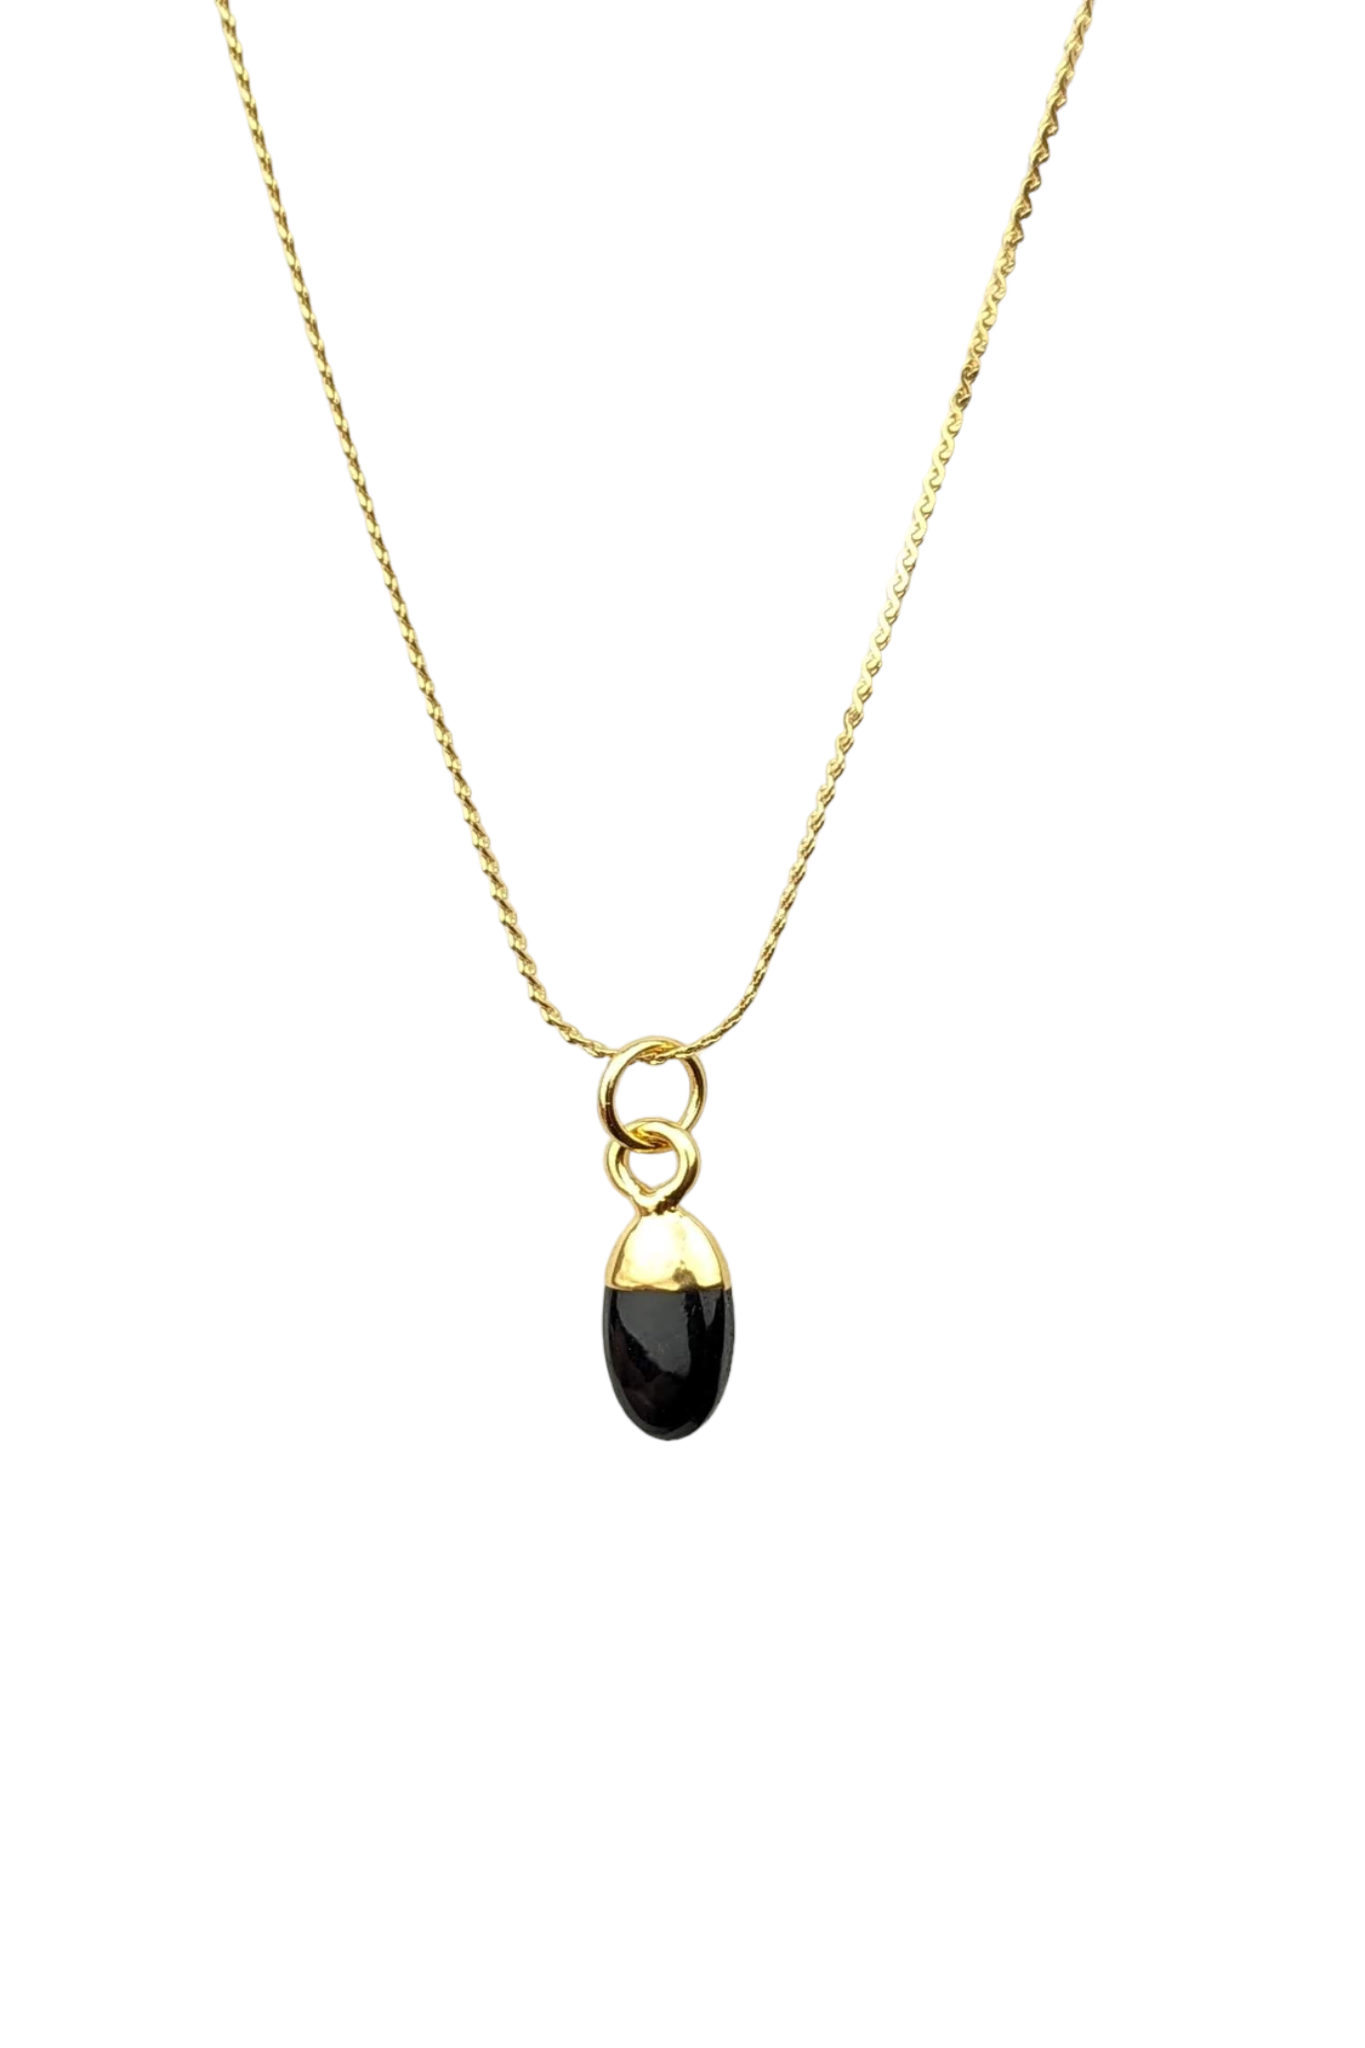 protection courage strenght stay gold by mme bovary onyx crystal